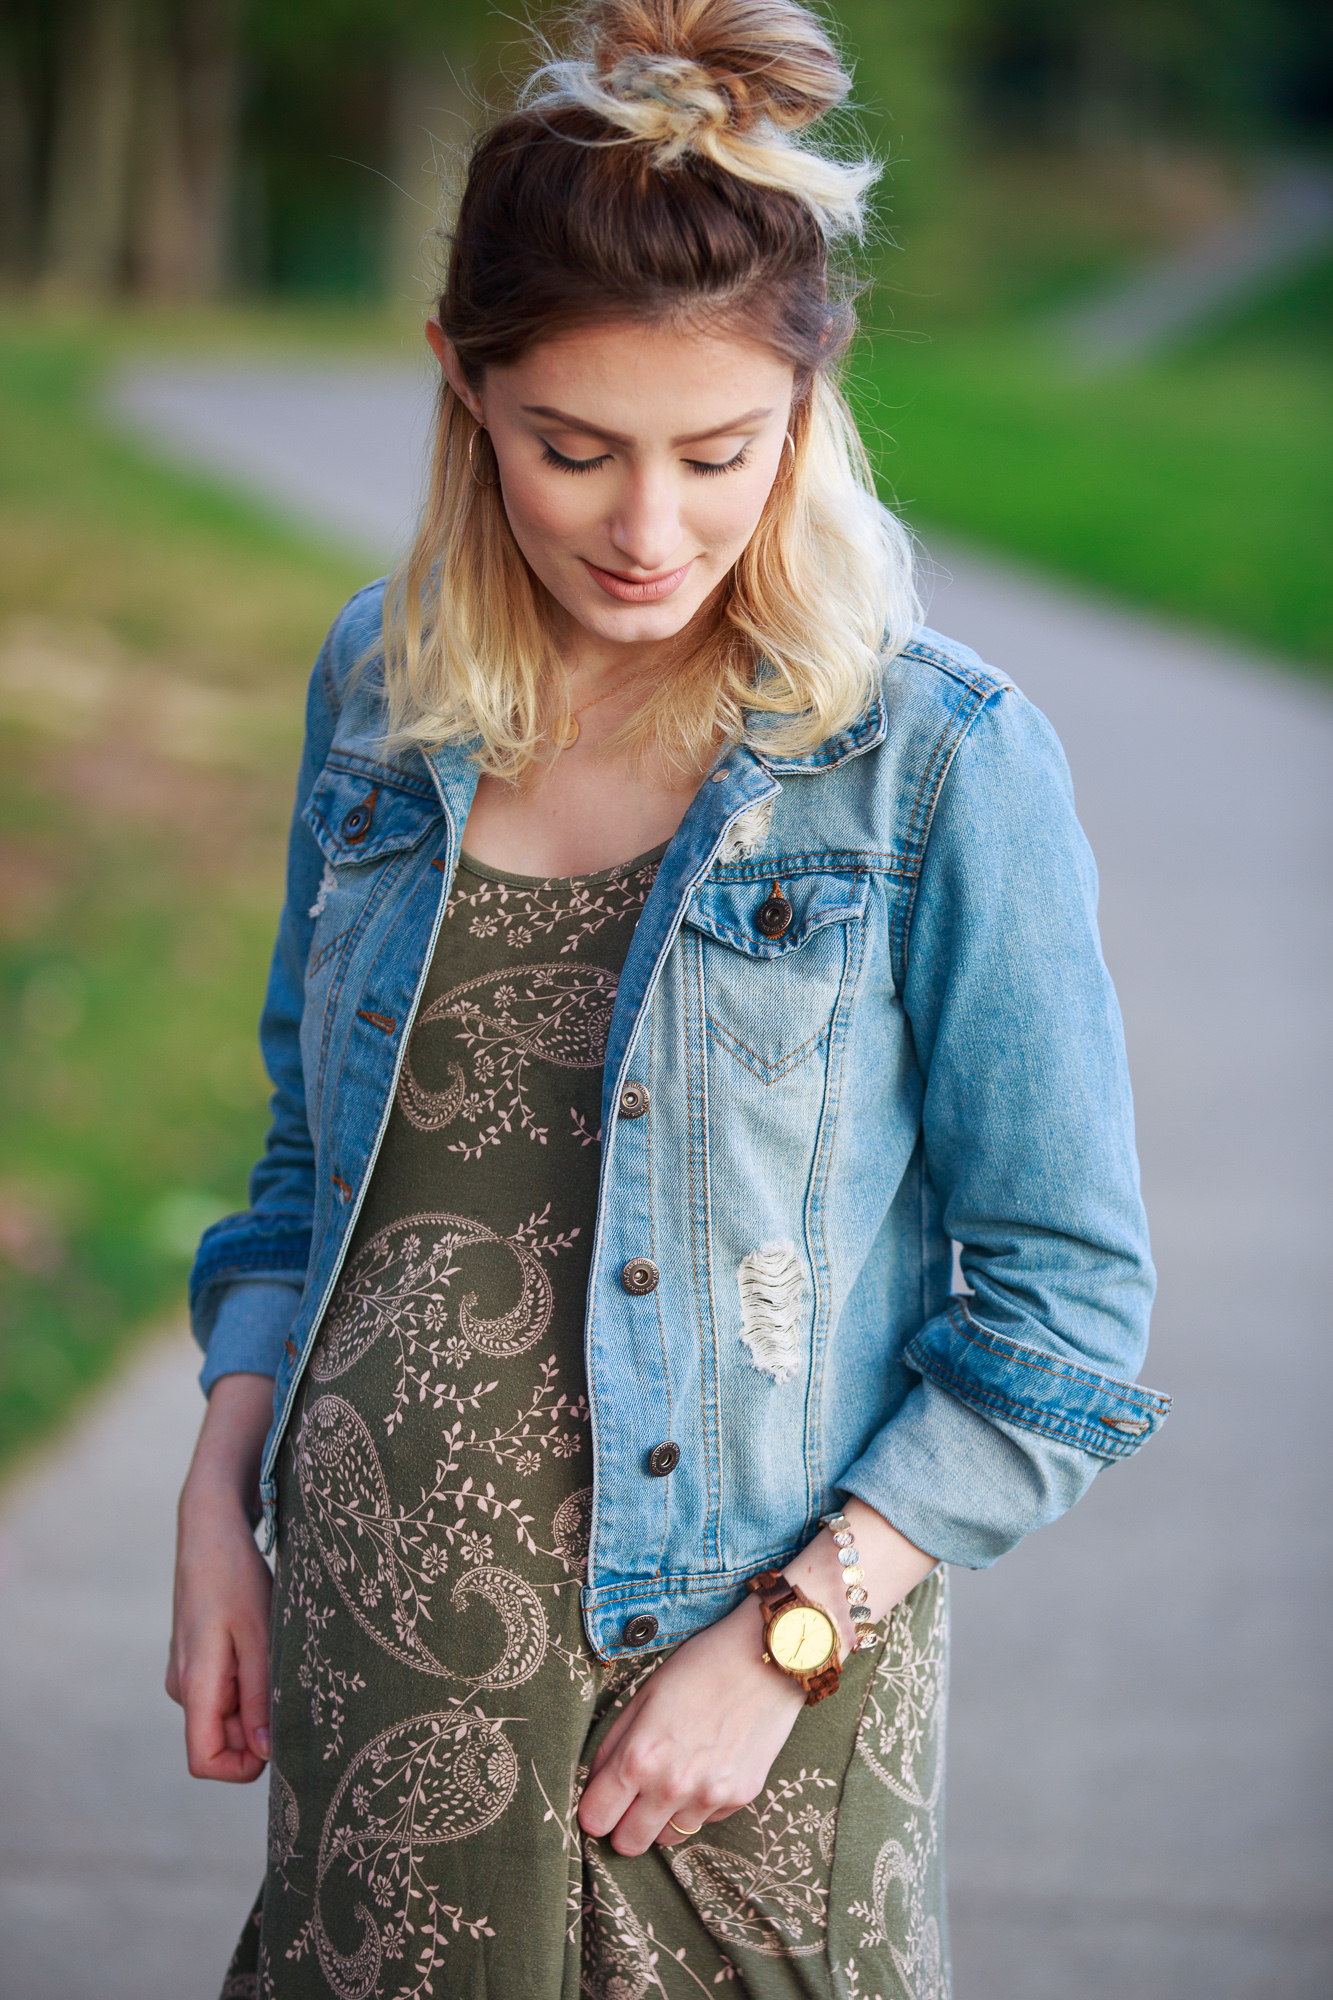 Lifestyle and fashion blogger Jessica Linn wearing a Charlotte Russe olive colored dress with a neutral paisley pattern, a denim jacket, thigh high socks, and Ralph Lauren boots. Perfect fall maternity outfit!